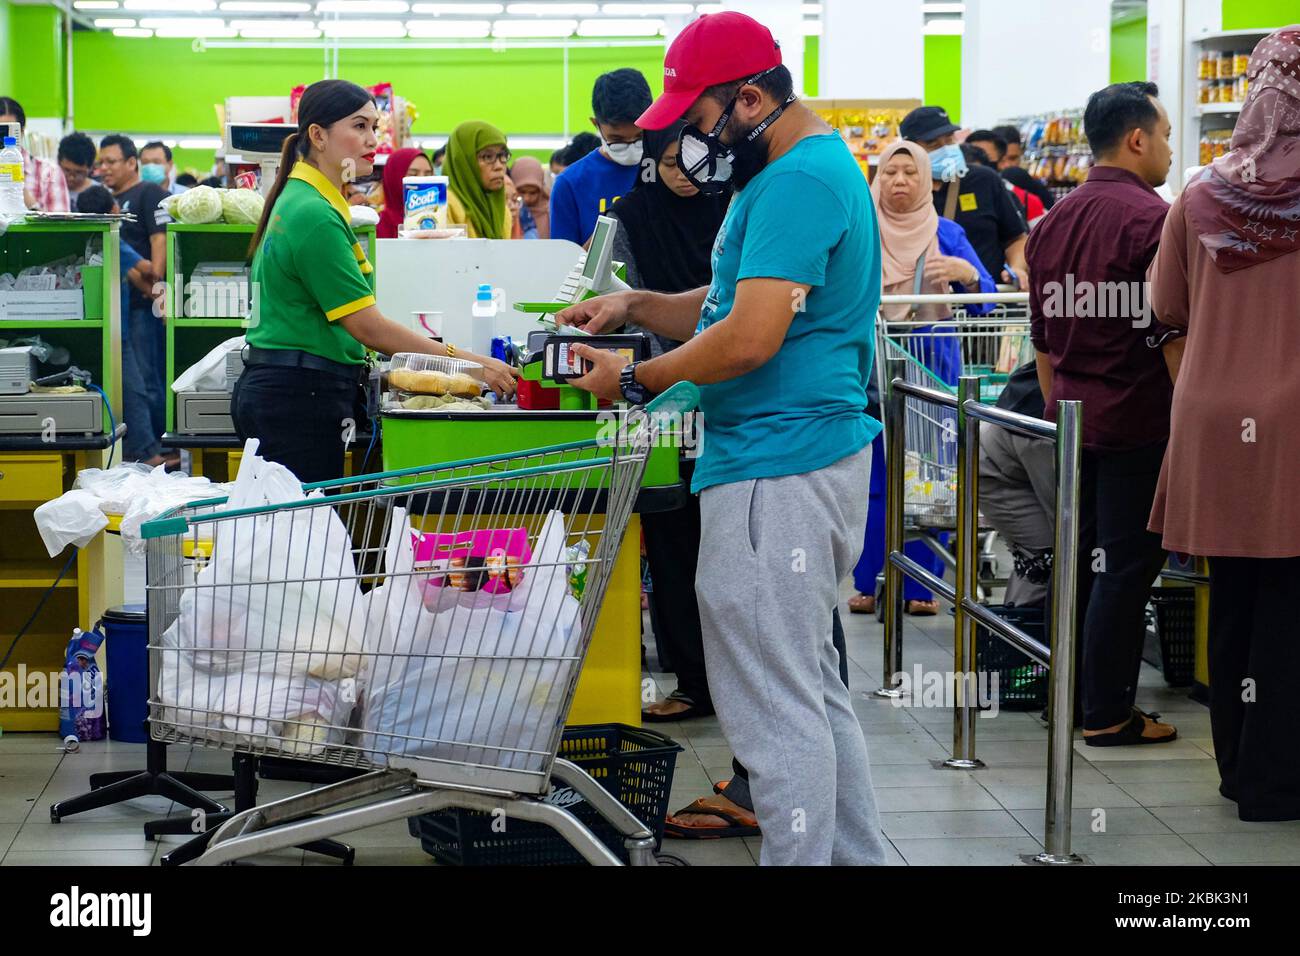 Malaysian Grocery Shoppers in a shopping frenzy at a Vegetable